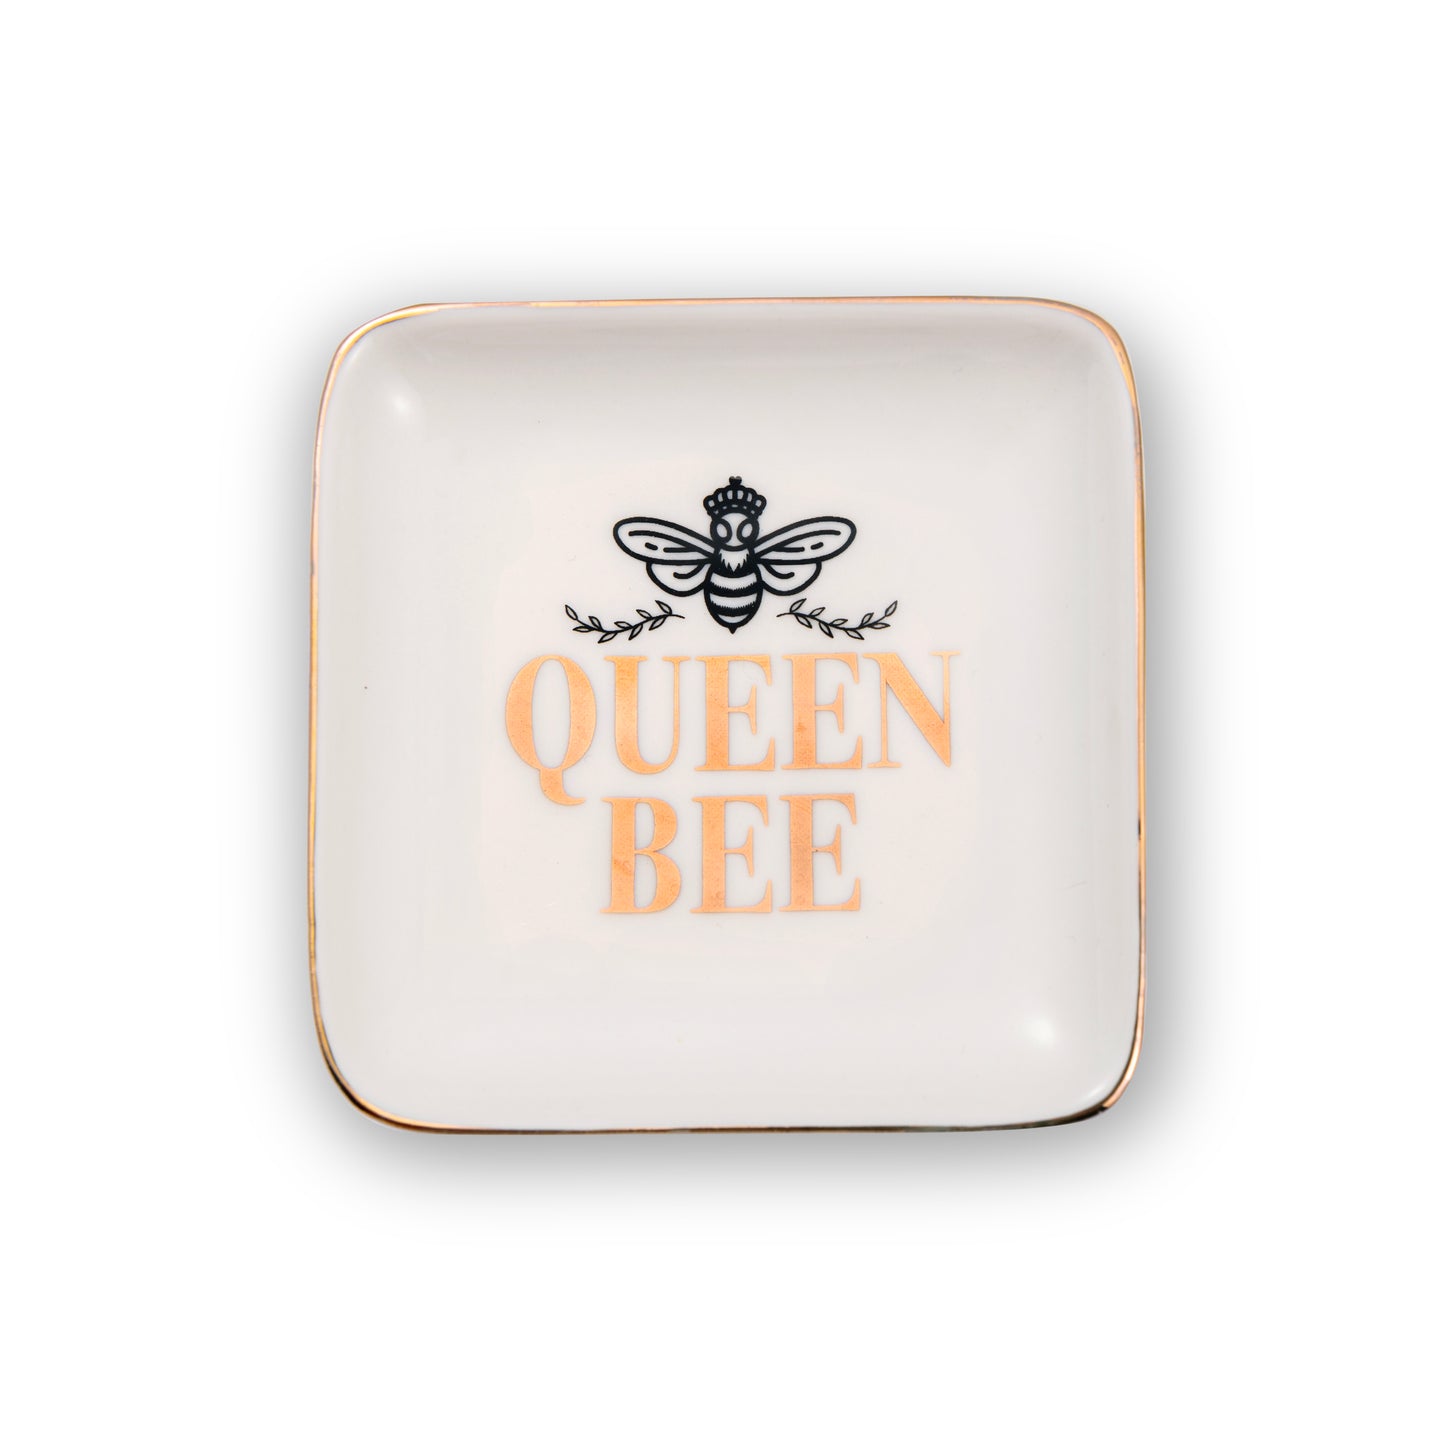 Queen Bee Make Up & Things Ceramic Trinket Tray